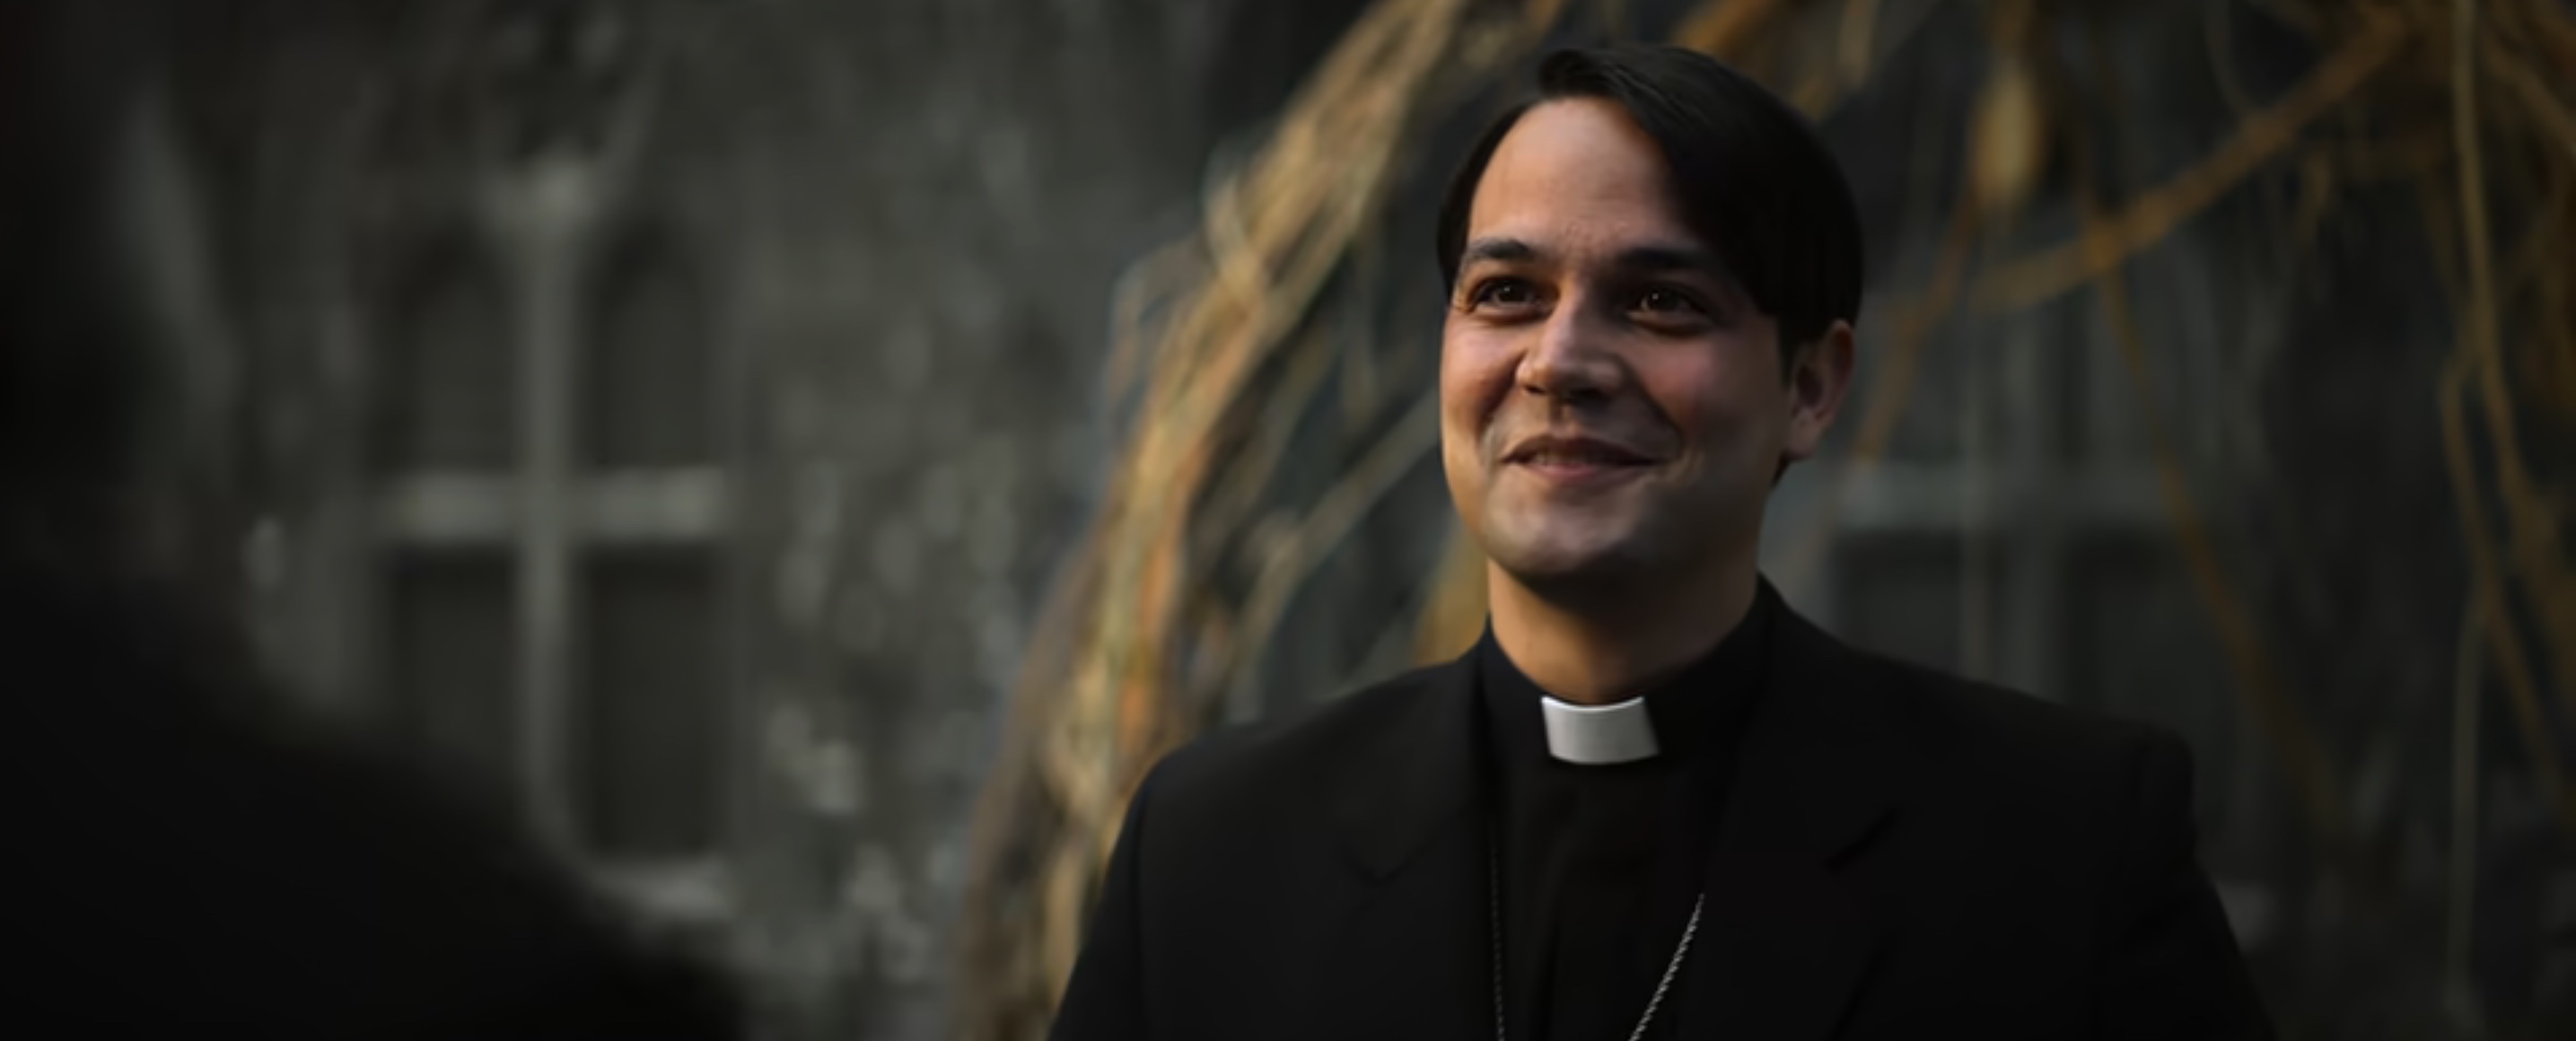 The Pope's Exorcist Cast on Netflix - Daniel Zovatto as Father Esquibel